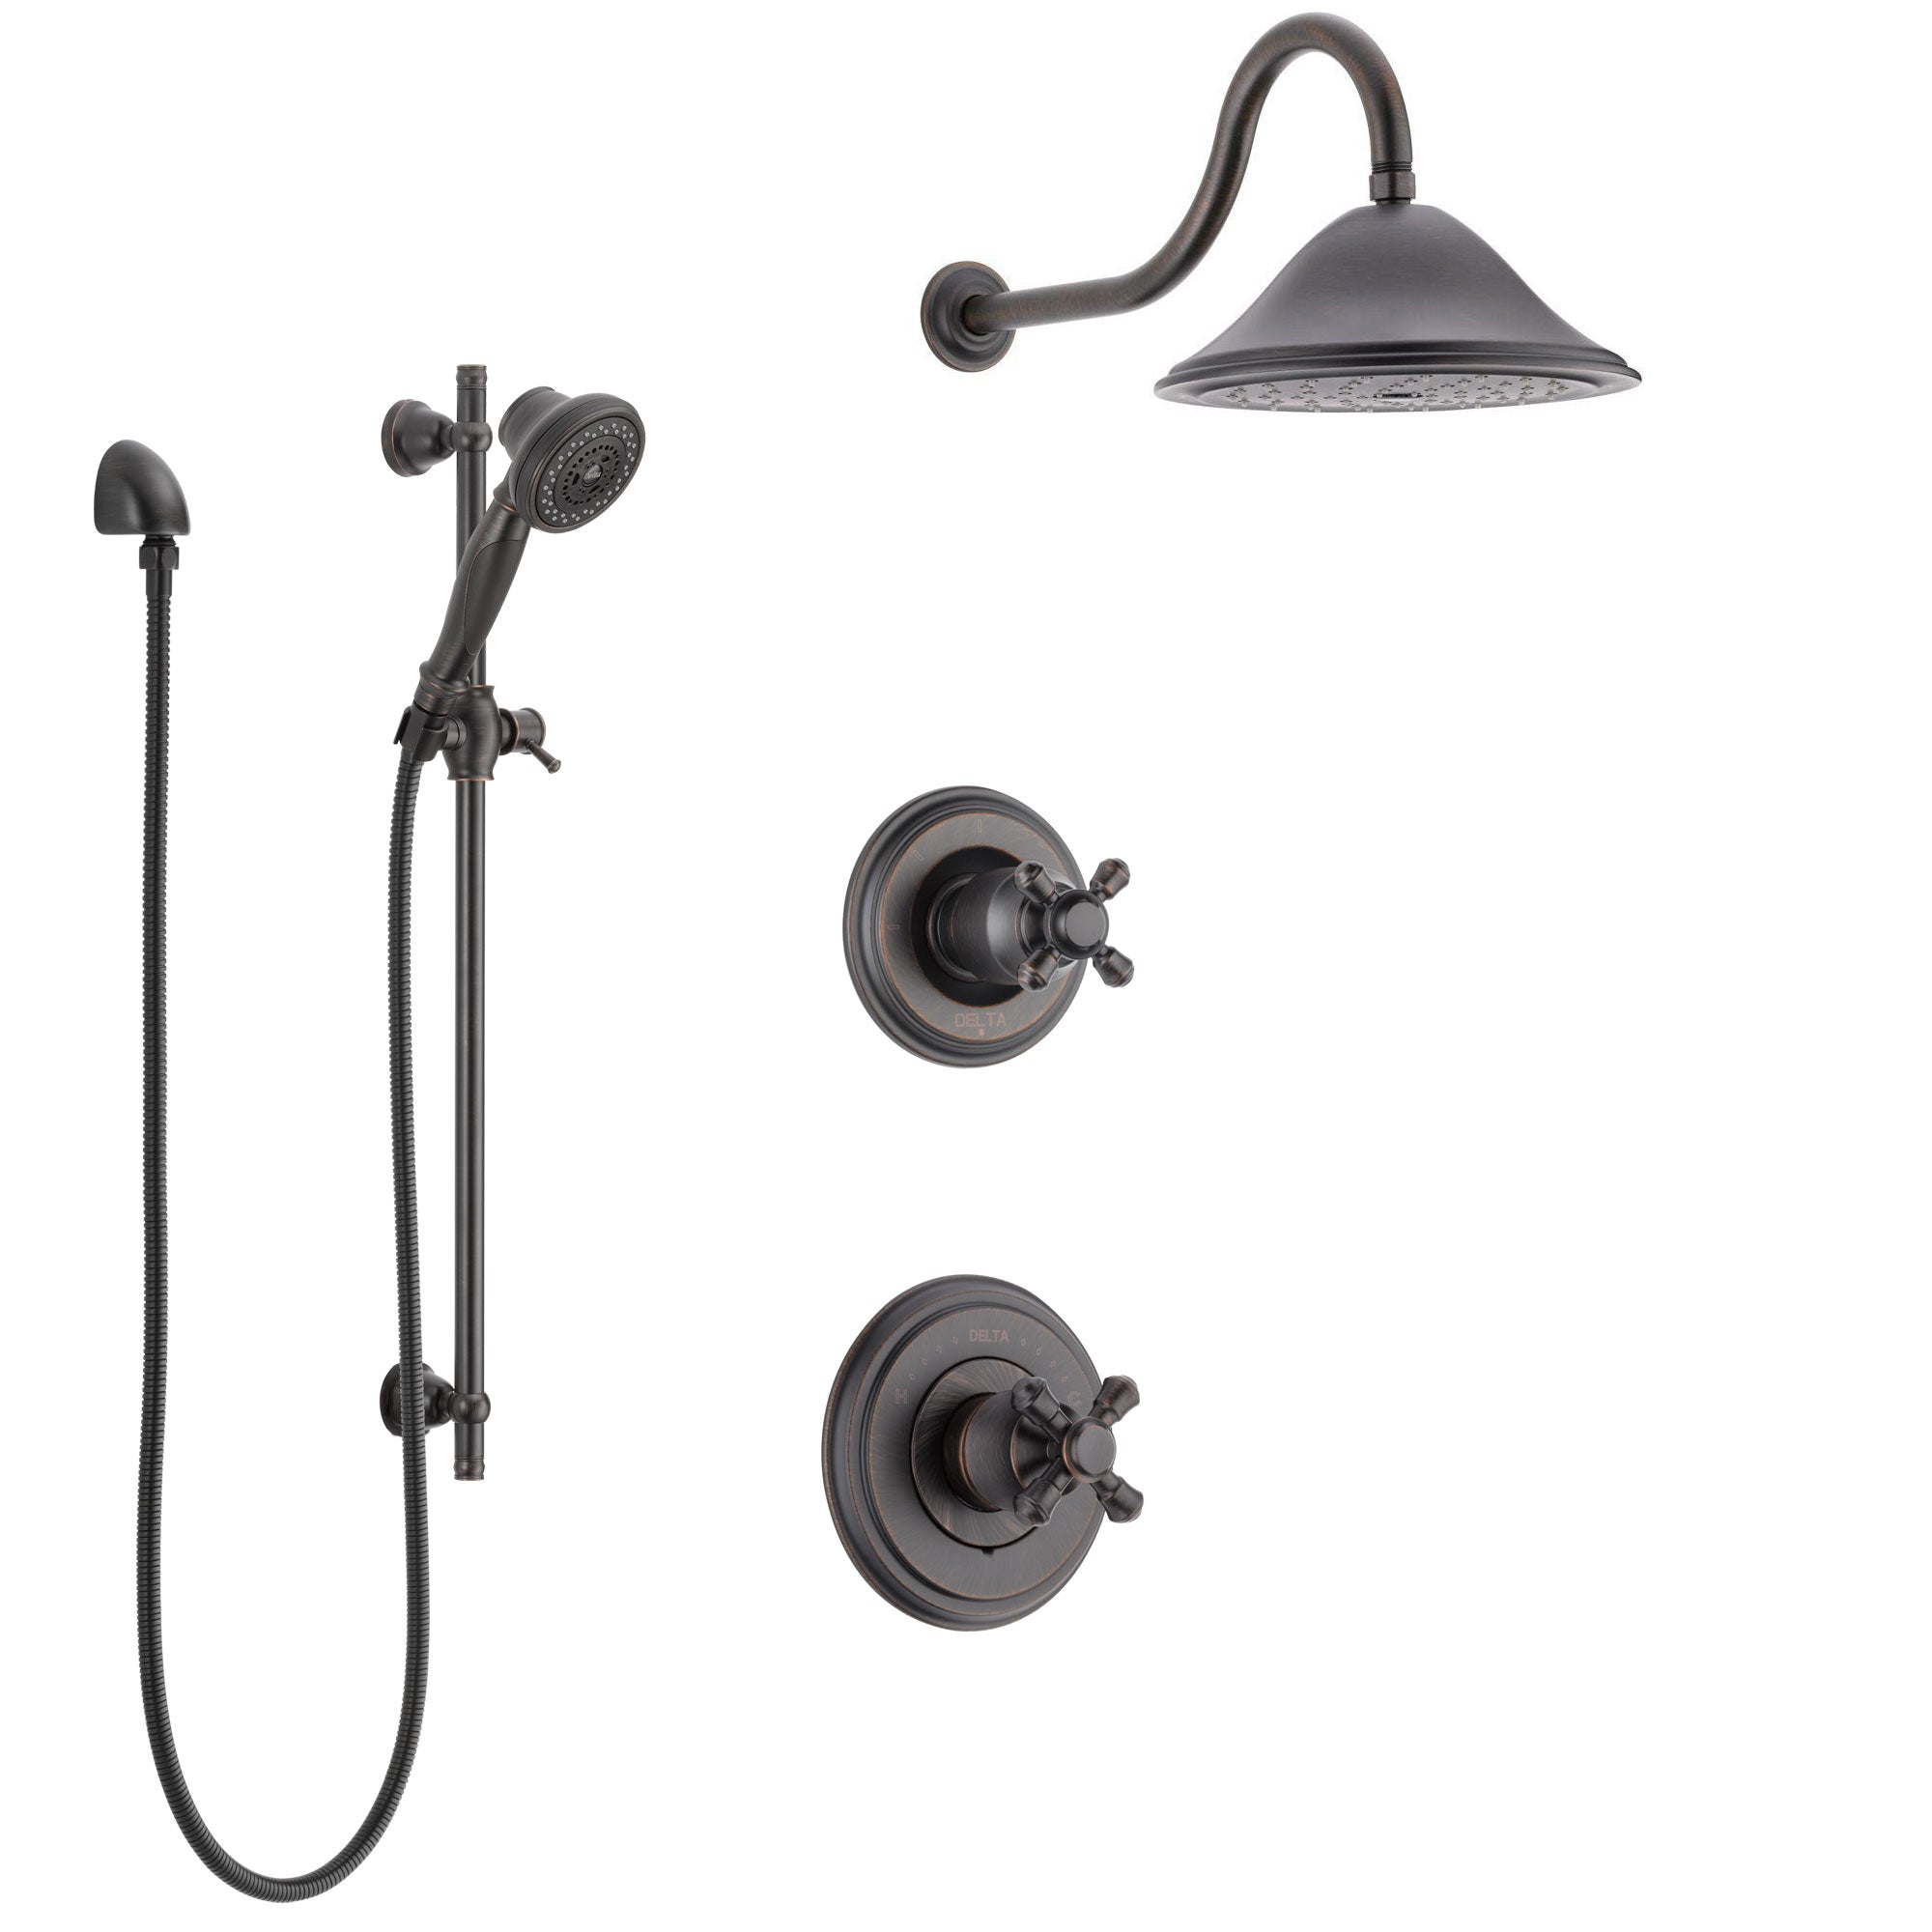 Delta Cassidy Venetian Bronze Finish Shower System with Control Handle, 3-Setting Diverter, Showerhead, and Hand Shower with Slidebar SS14972RB6